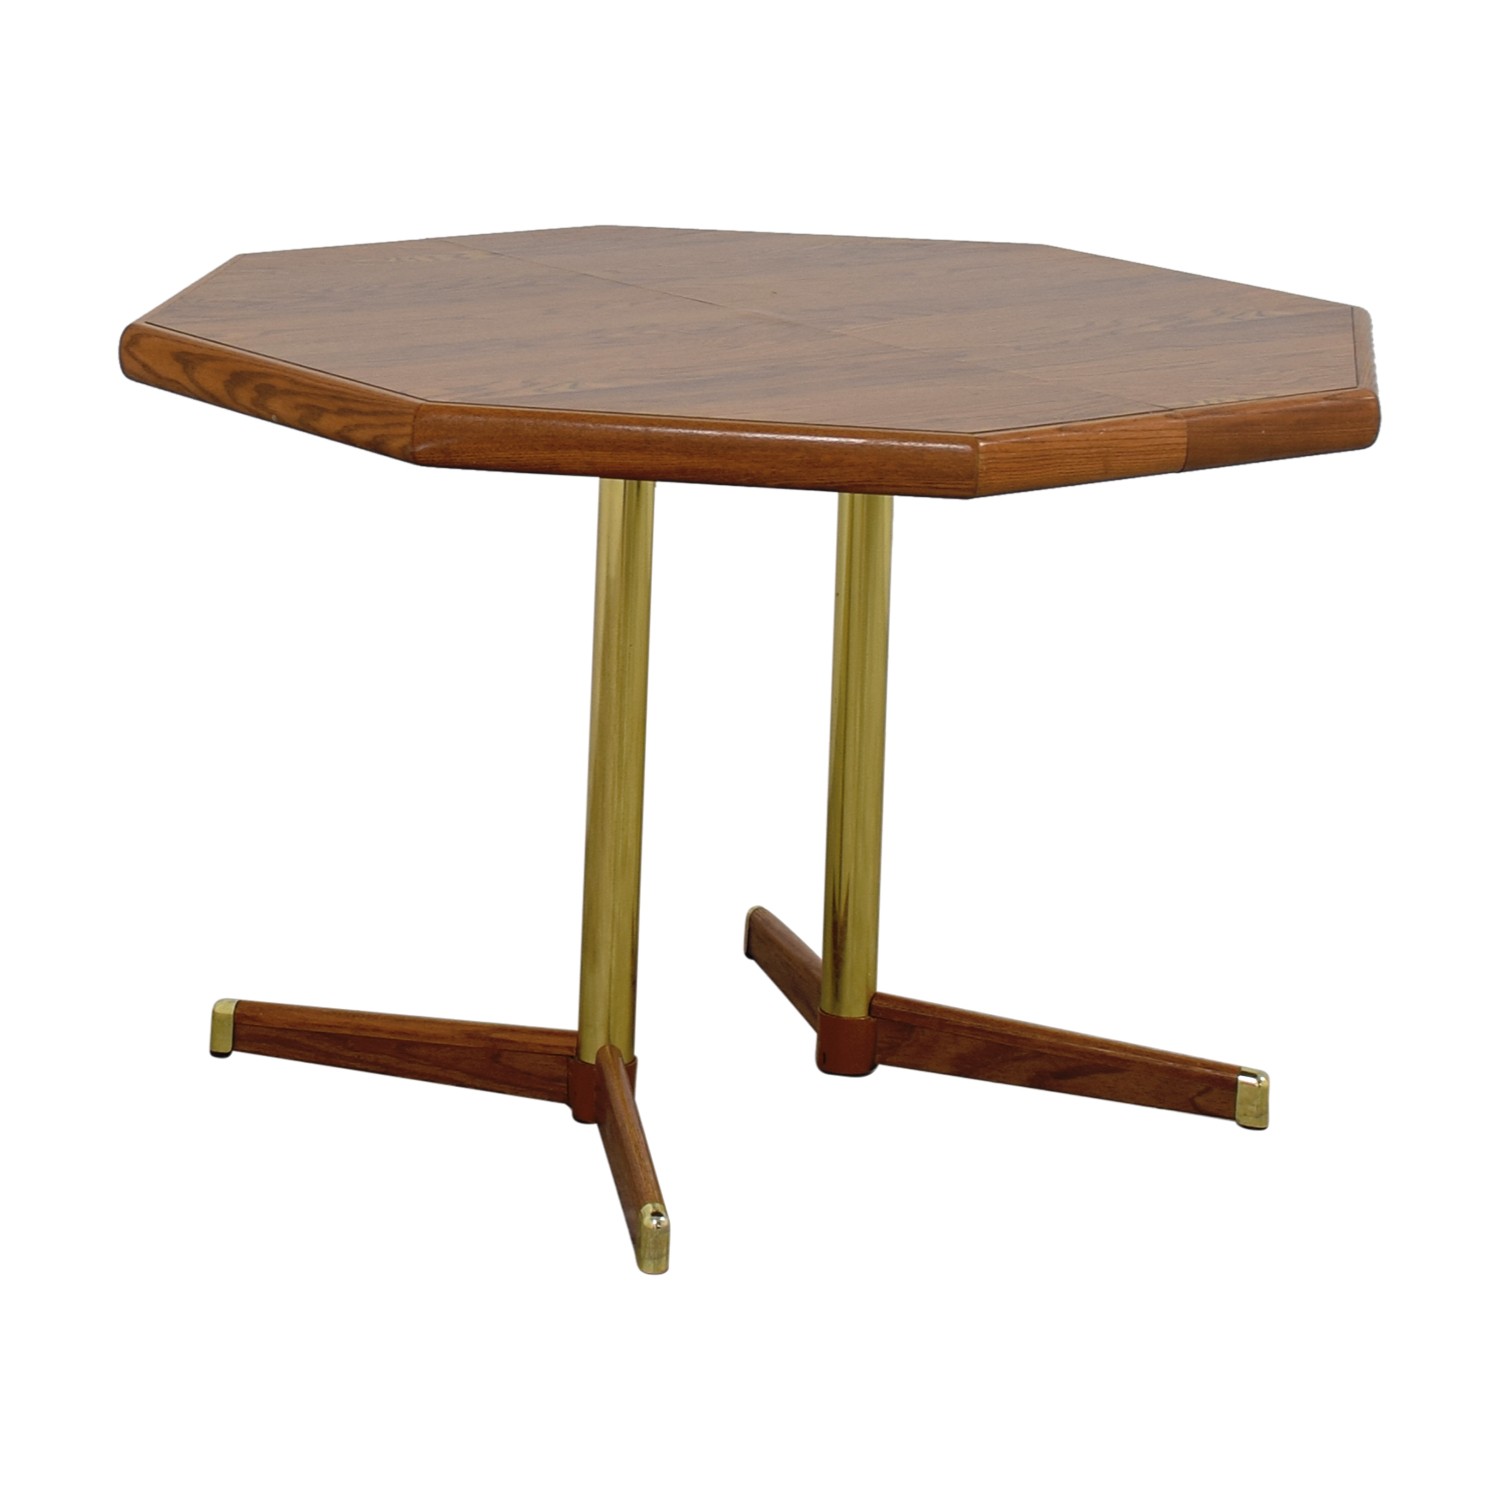 80 off octagon kitchen table with leaf tables 2